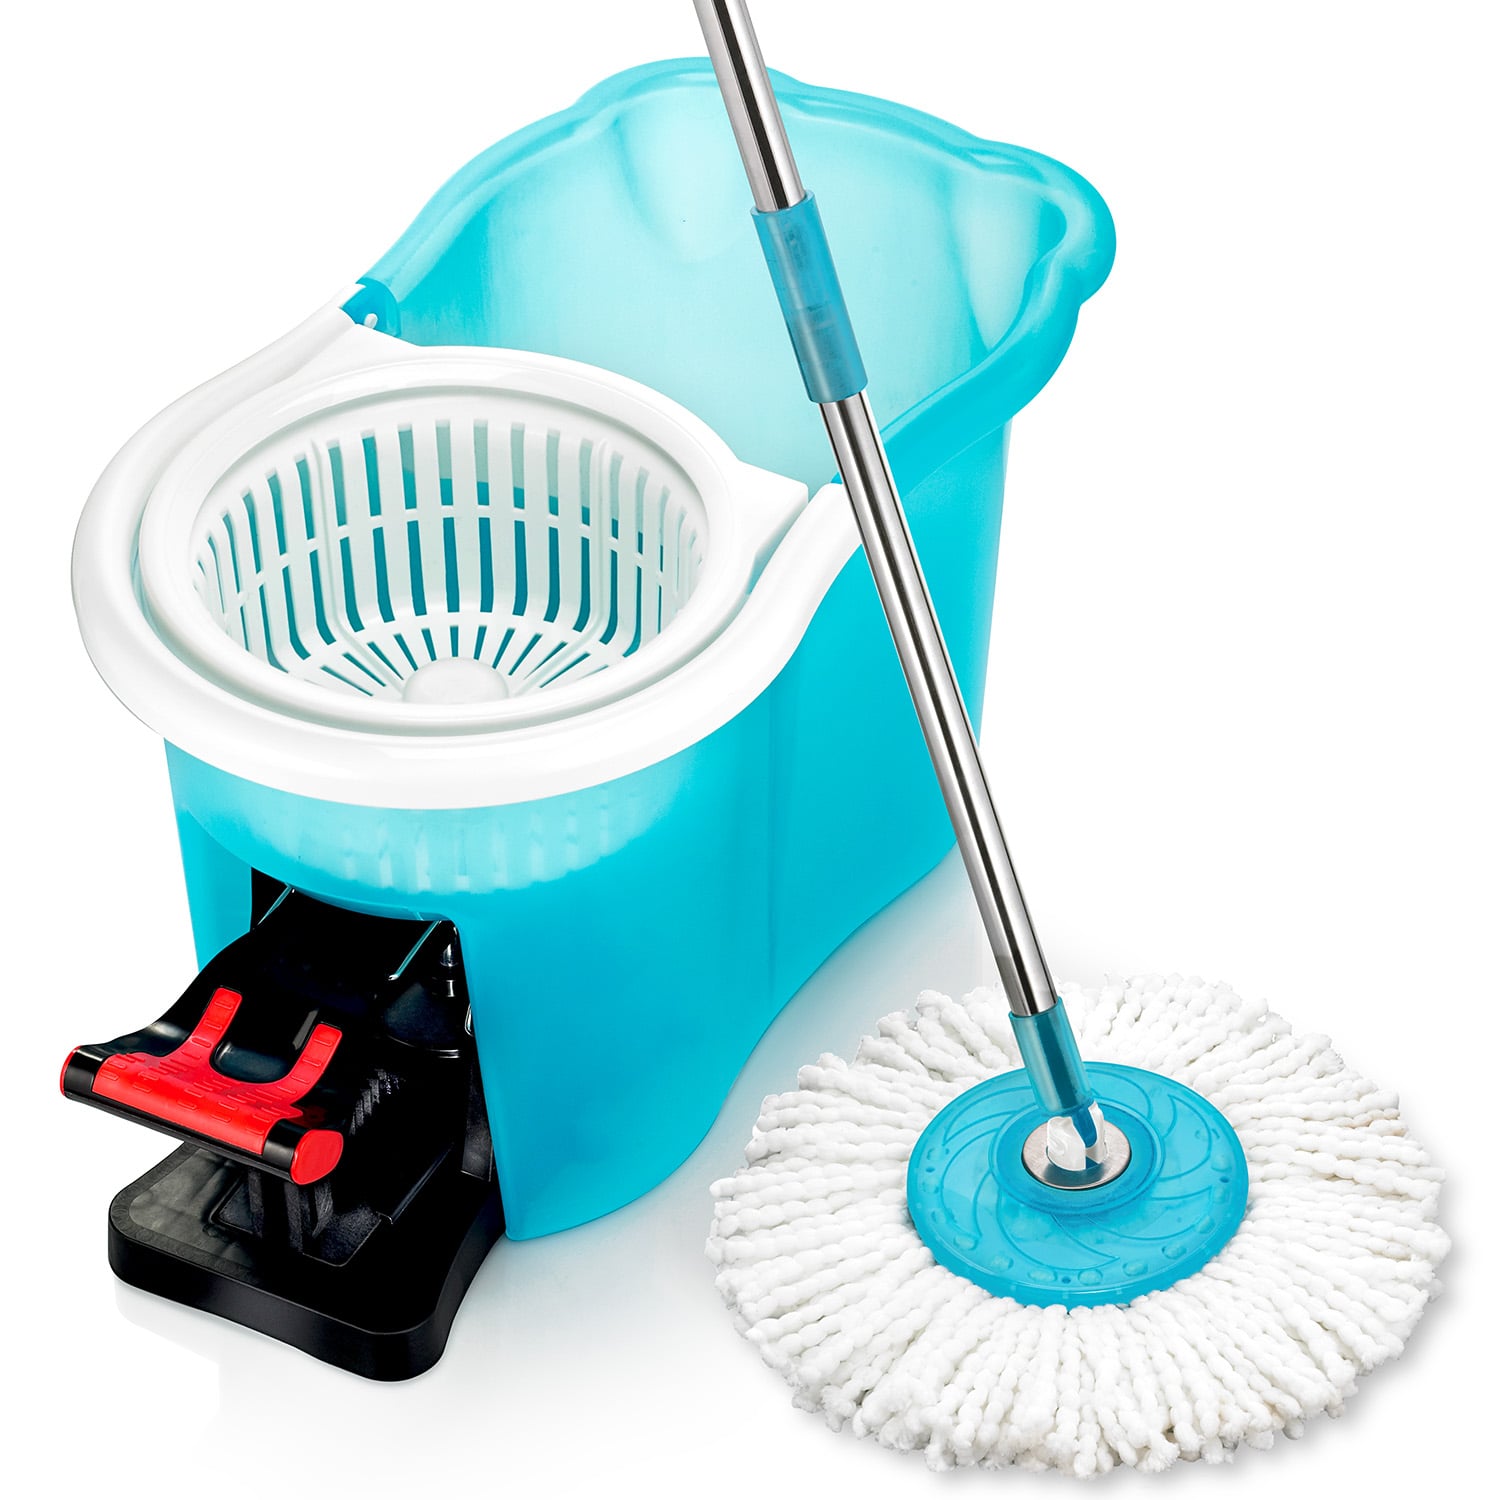 Hurricane Spin Mop As Seen On TV Mop & Bucket Cleaning System by BulbHead - image 1 of 9